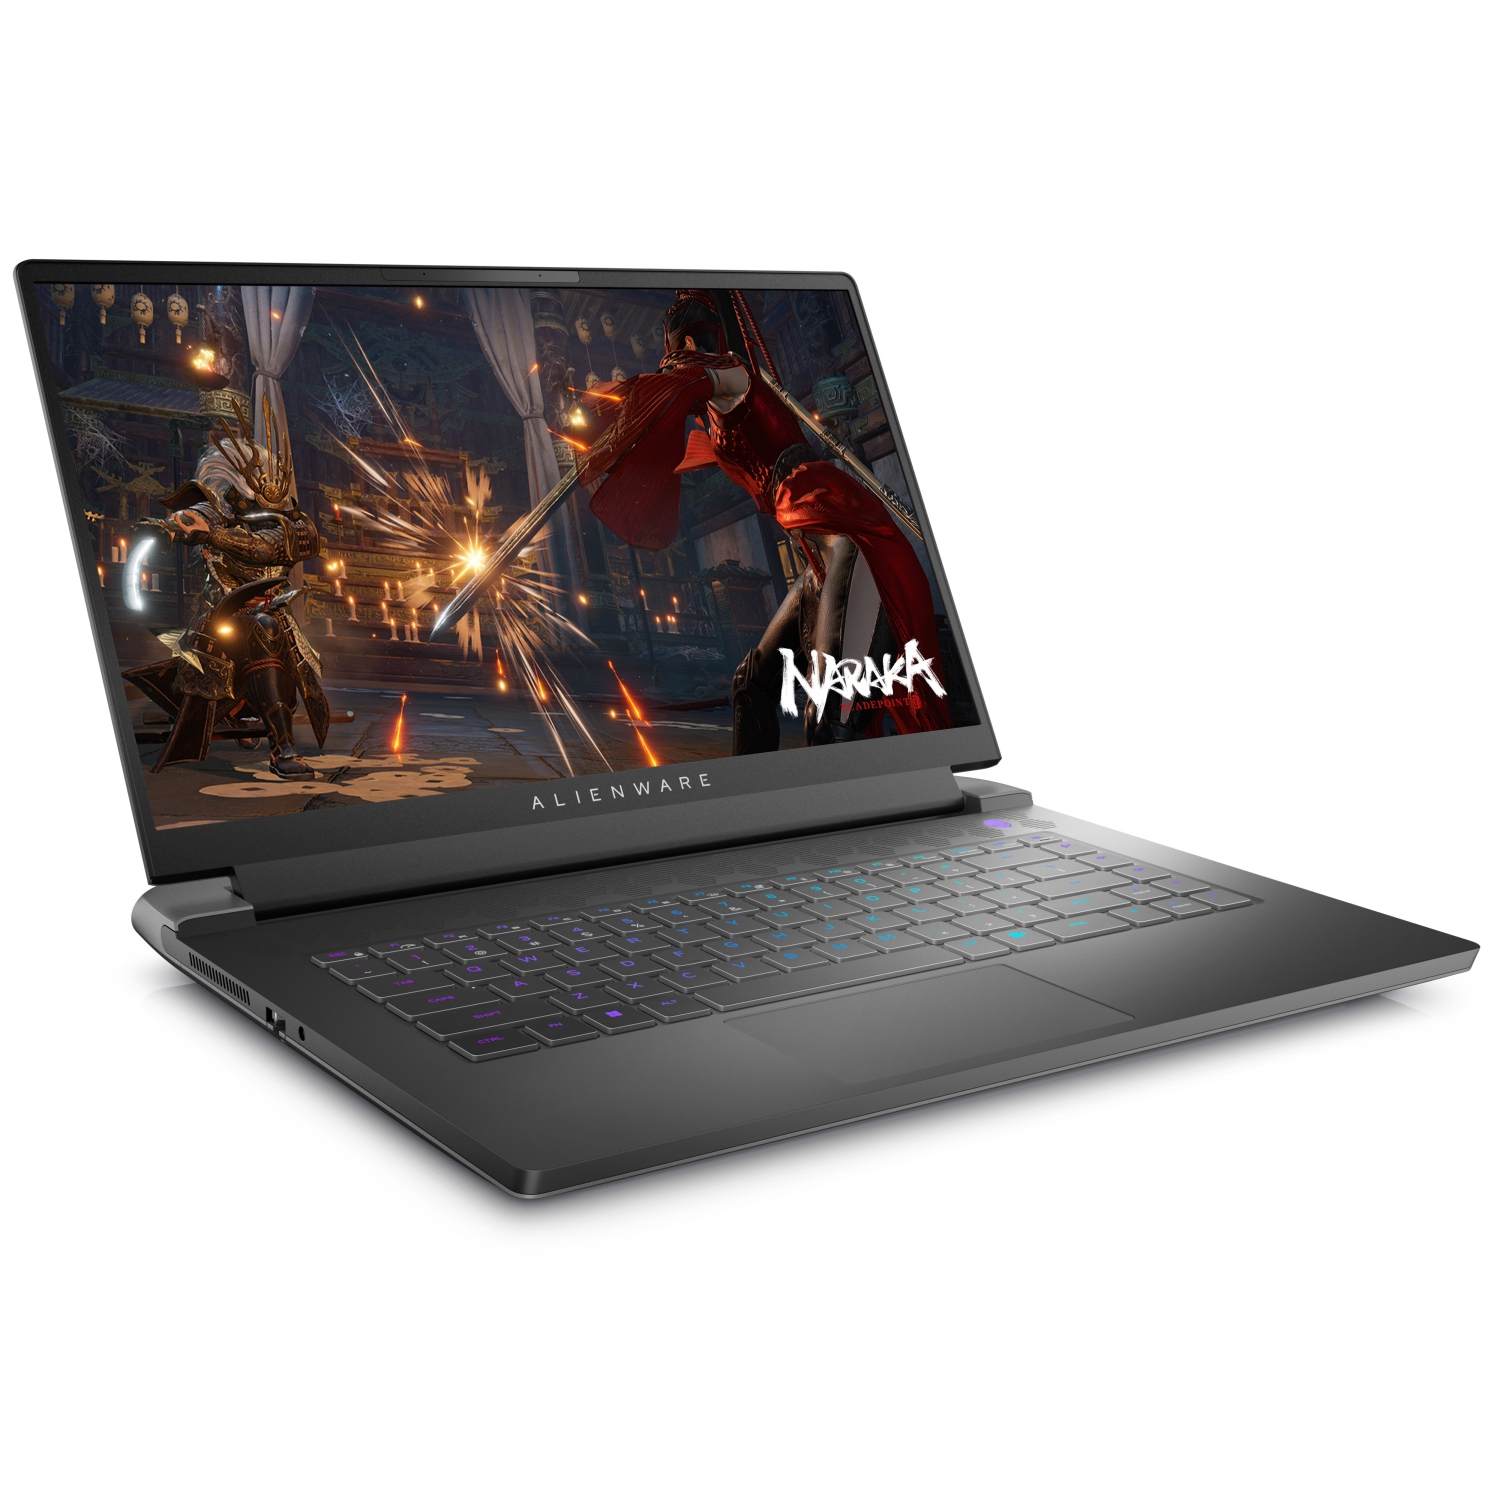 Refurbished (Excellent) – Dell Alienware m15 R7 Gaming Laptop (2022) | 15.6" QHD | Core i7 - 1TB SSD - 32GB RAM - RTX 3060 | 14 Cores @ 4.7 GHz - 12th Gen CPU - 6GB GDDR6